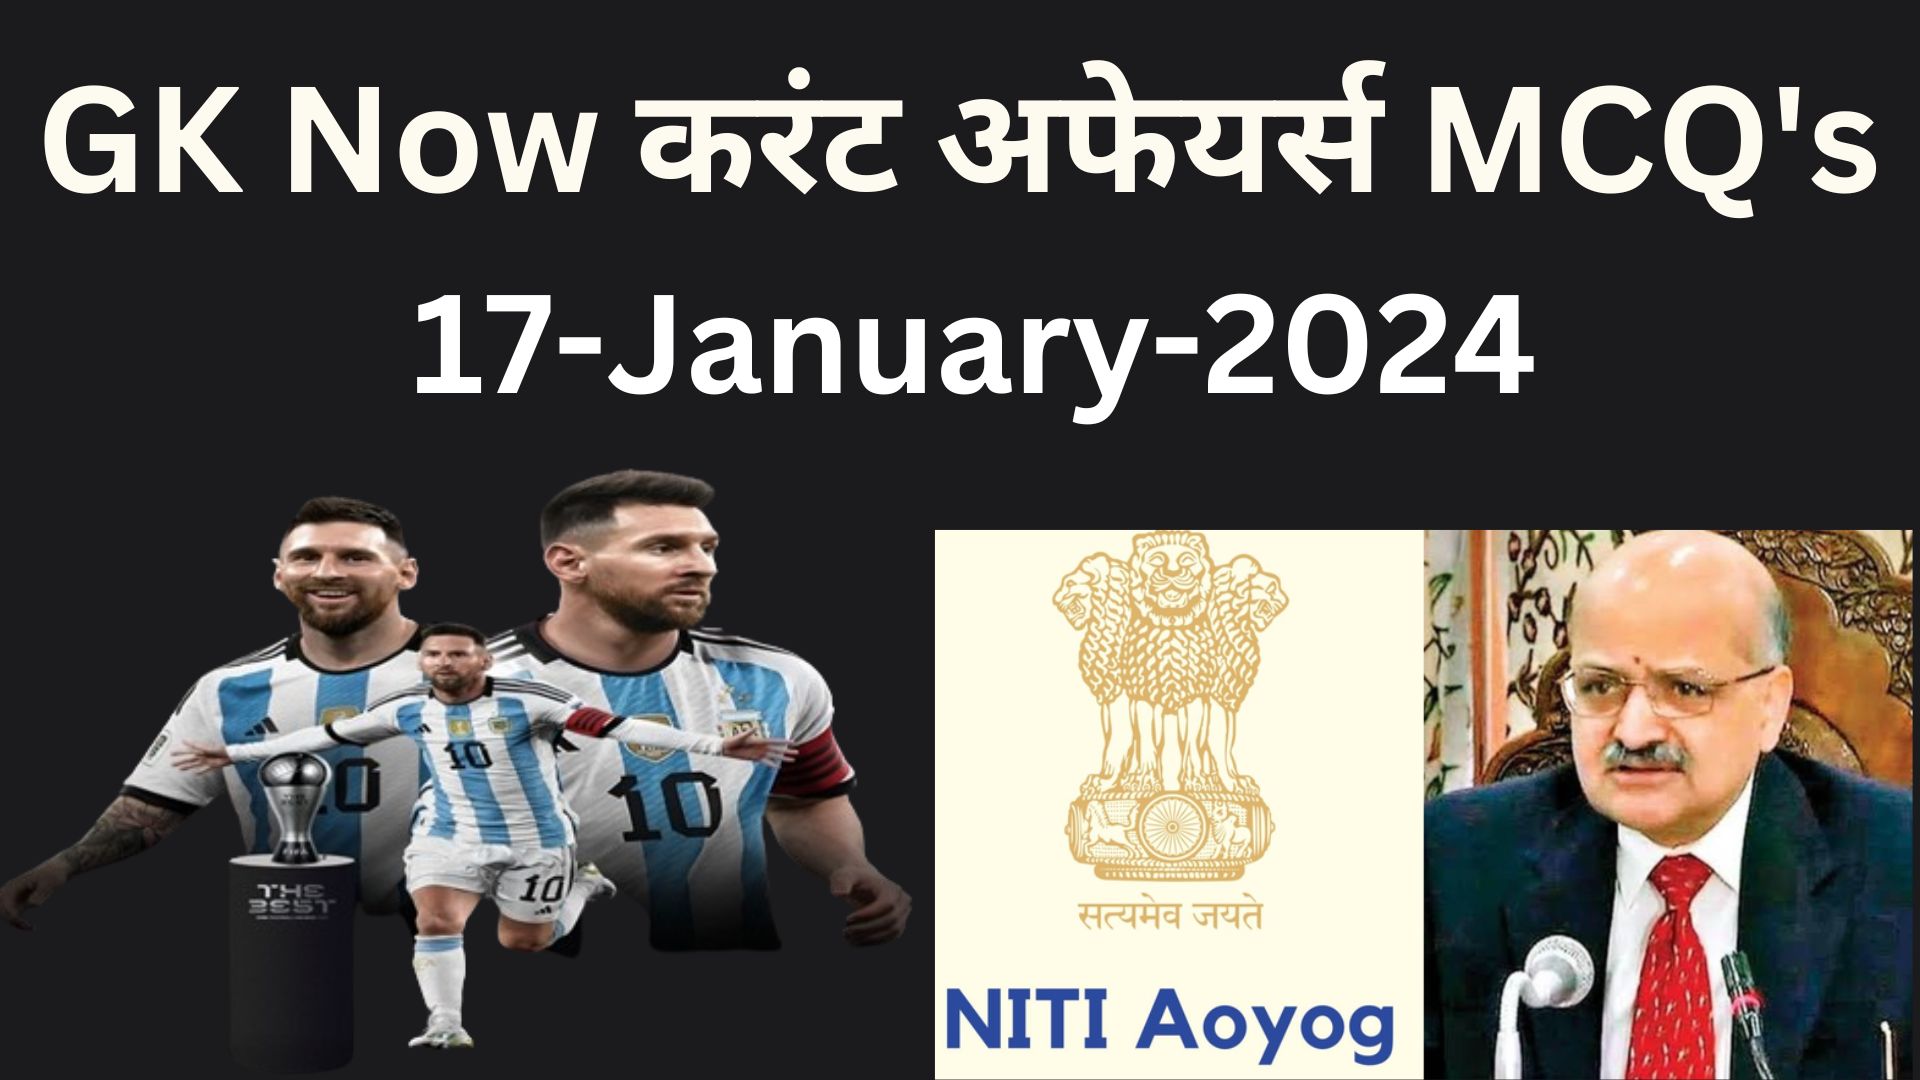 Daily Current Affairs MCQ 17 January 2024 GK Now